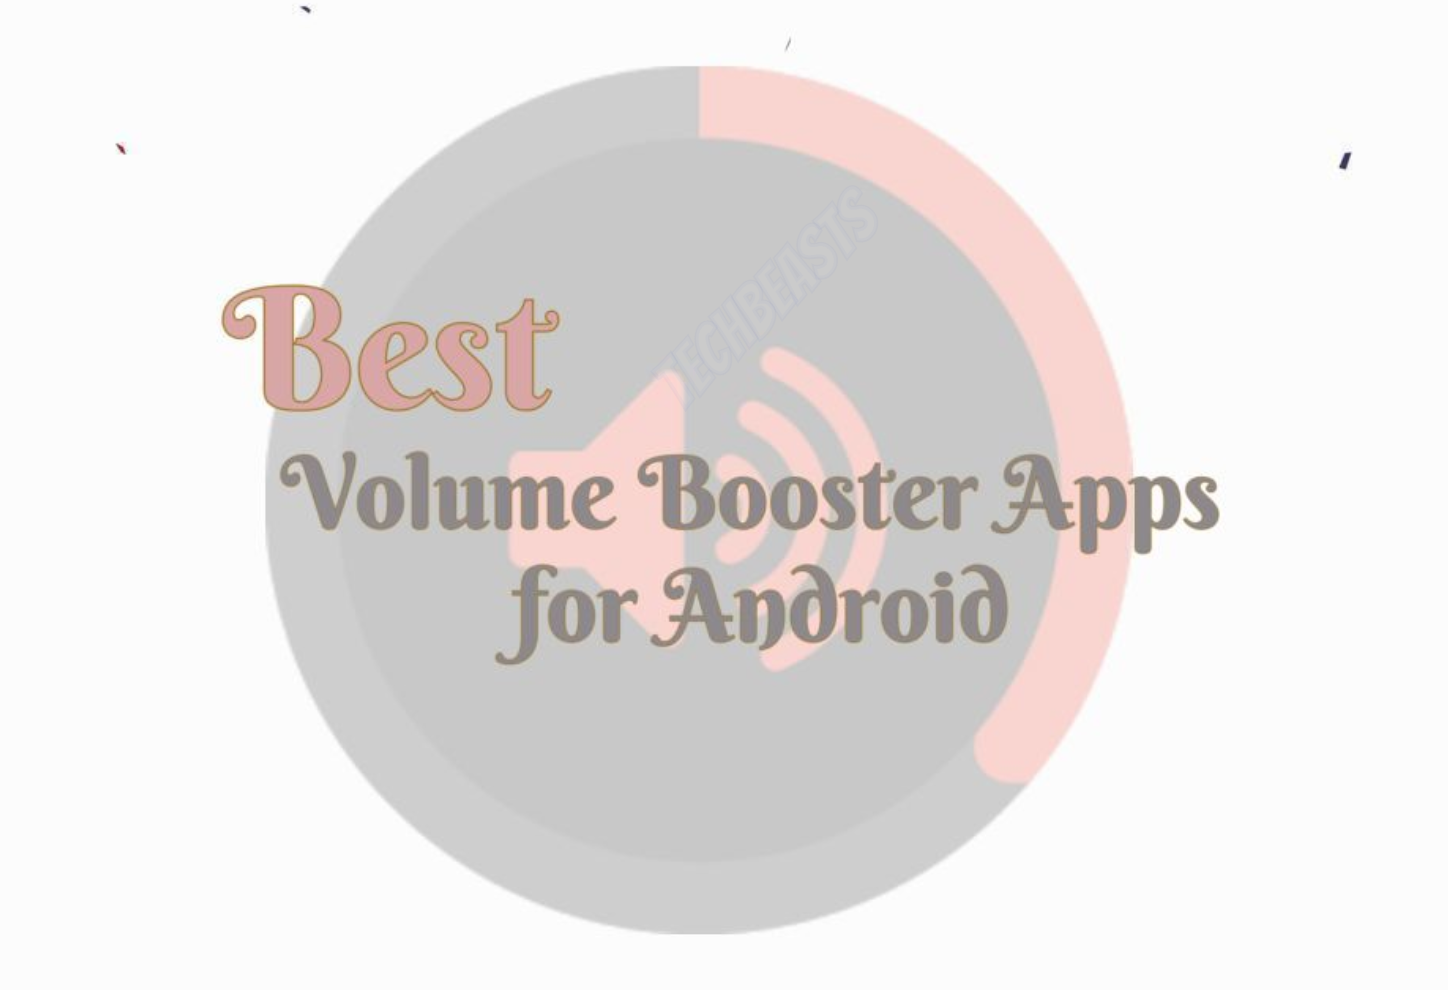 Volume Booster Apps